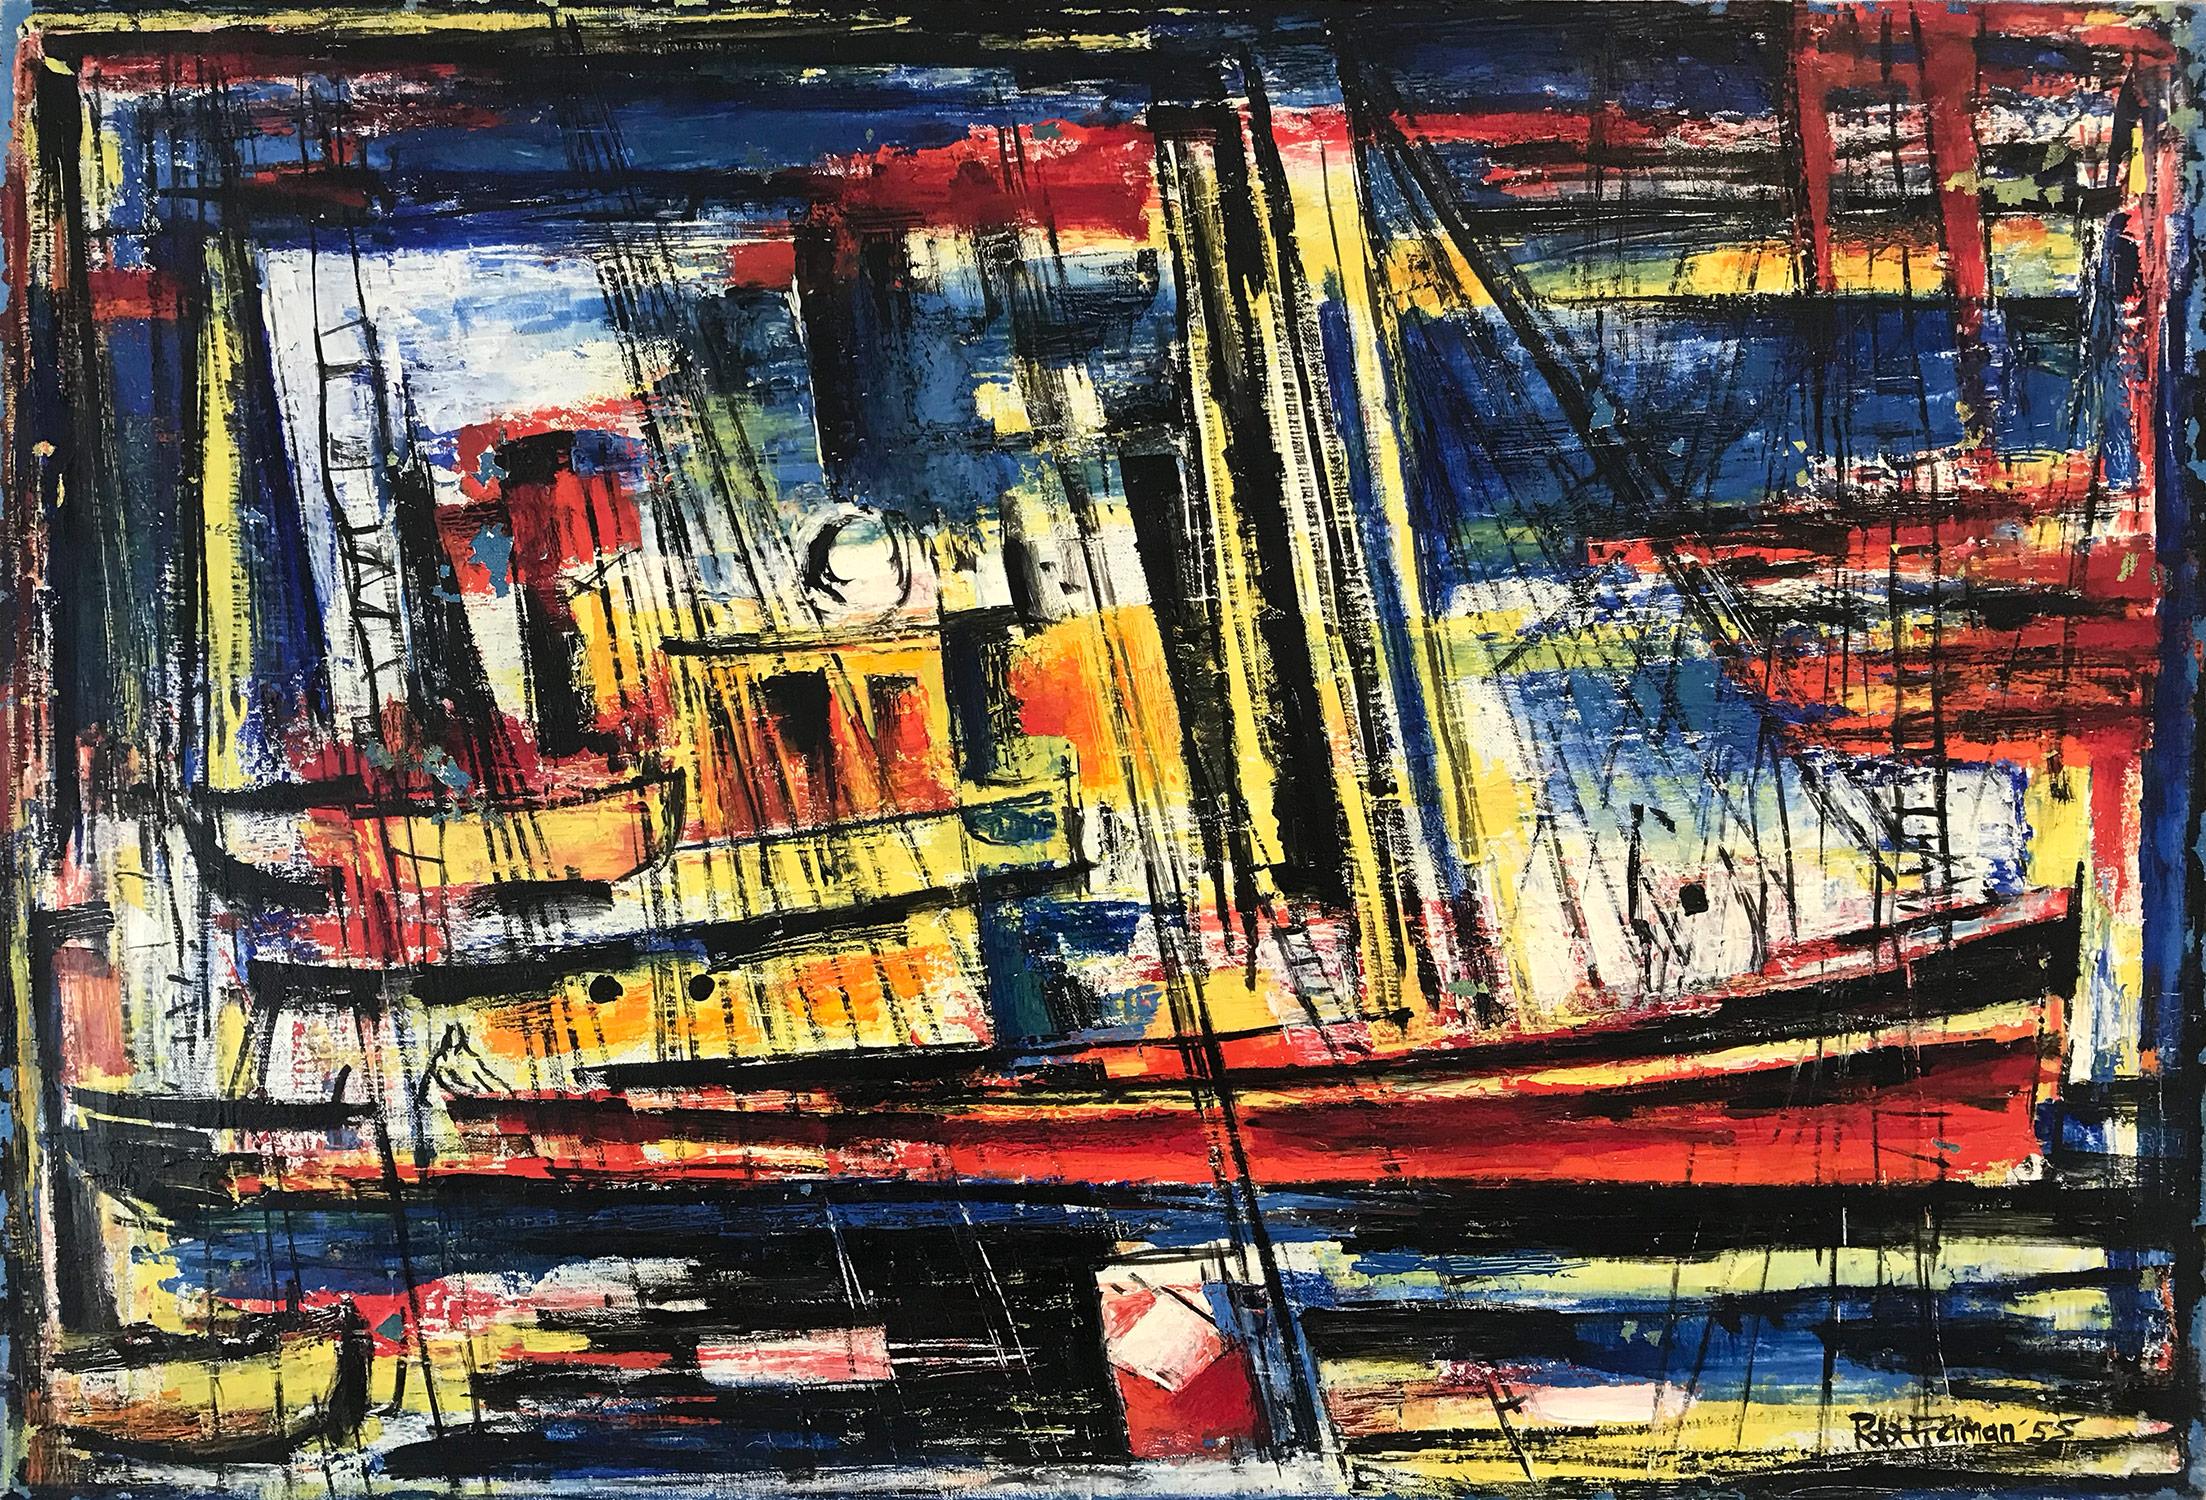 Robert Freiman Abstract Painting - "The Freighter" Mid Century Oil Painting on Canvas Abstract Marina with Boats